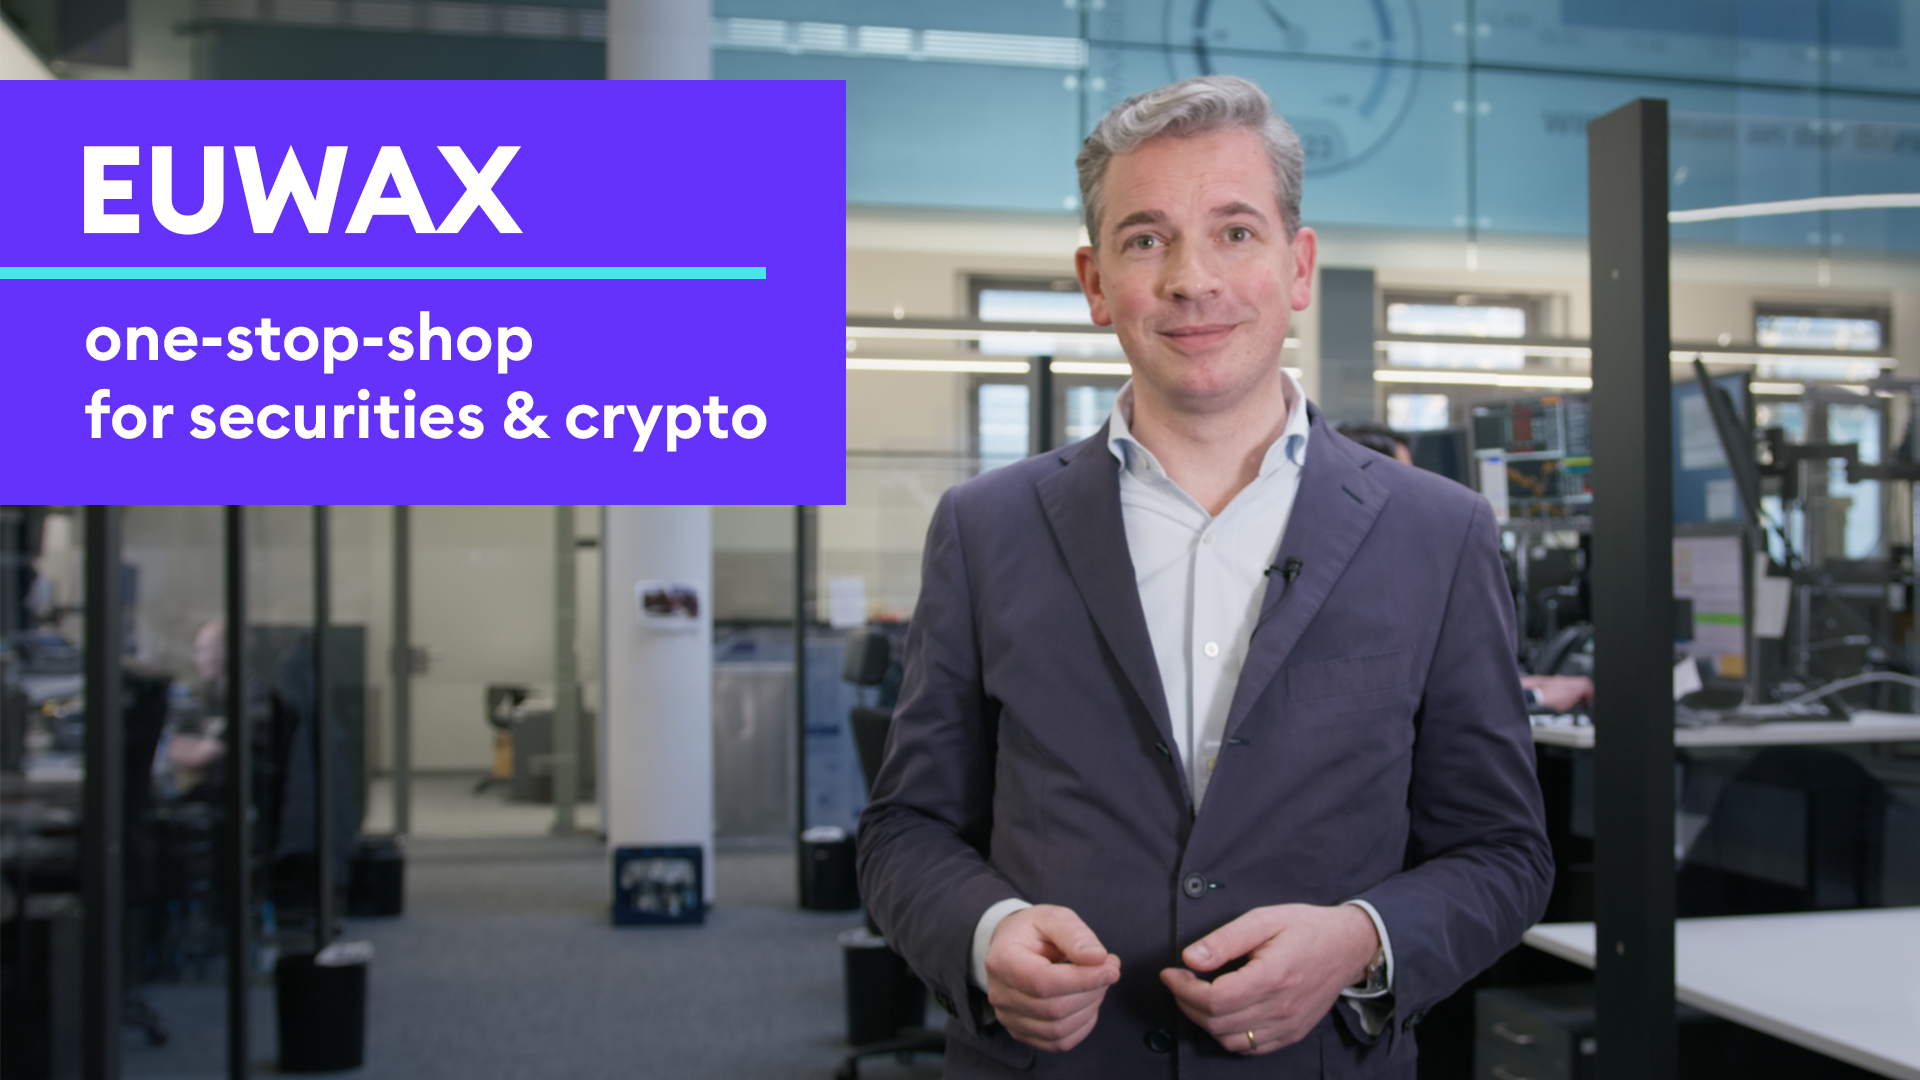 Our CEO talks about EUWAX as a one-stop-shop for capital markets and crypto